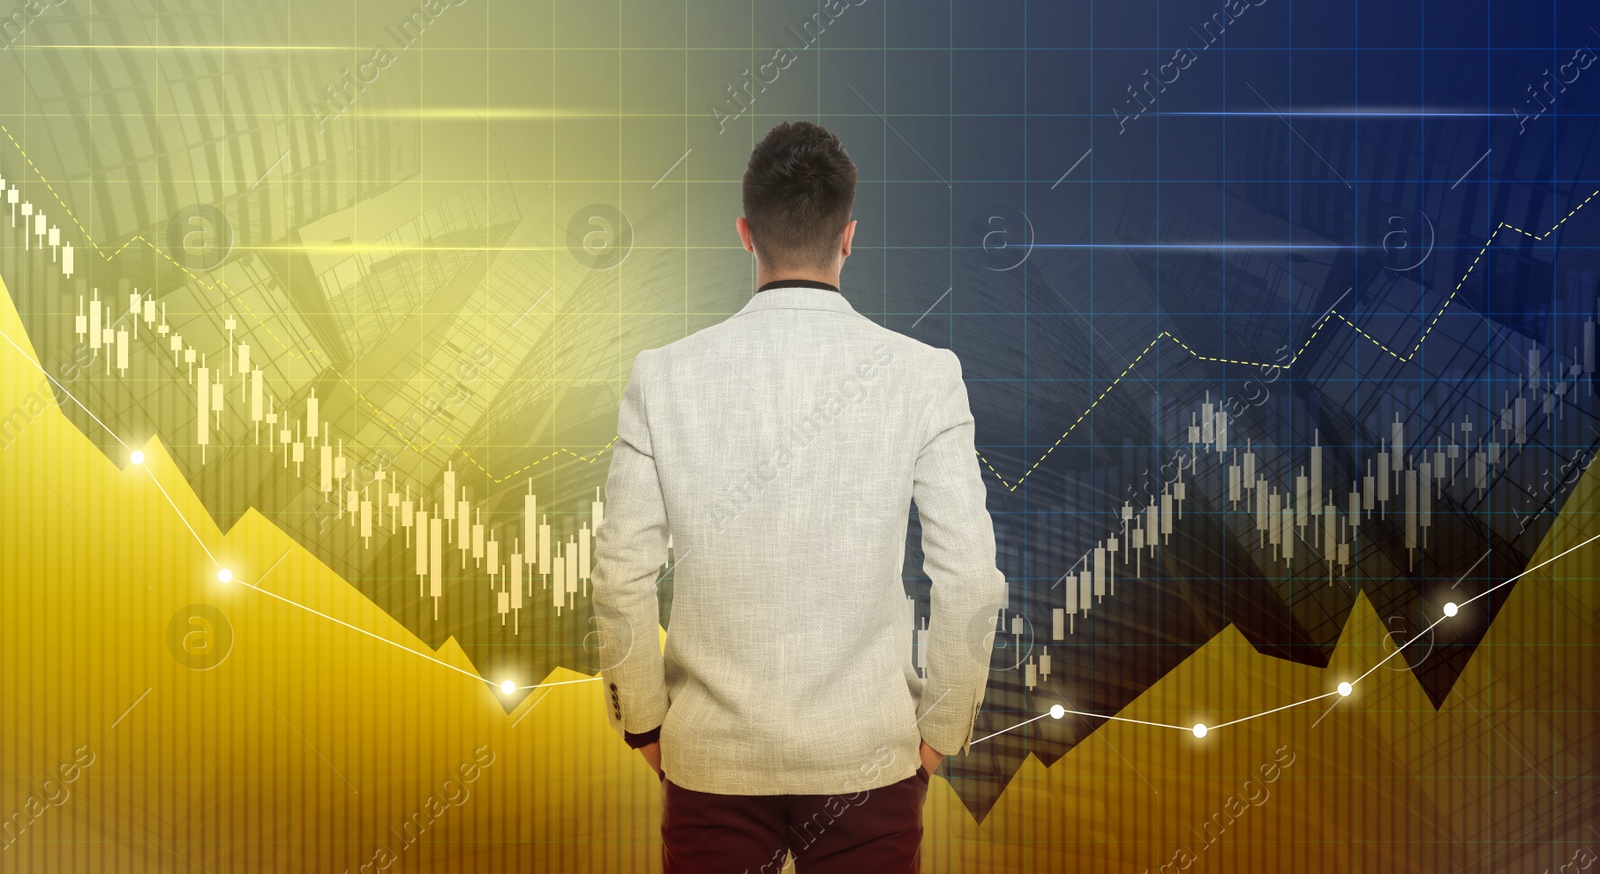 Image of Charts with schemes, businessman and modern building on background. Stock exchange trading